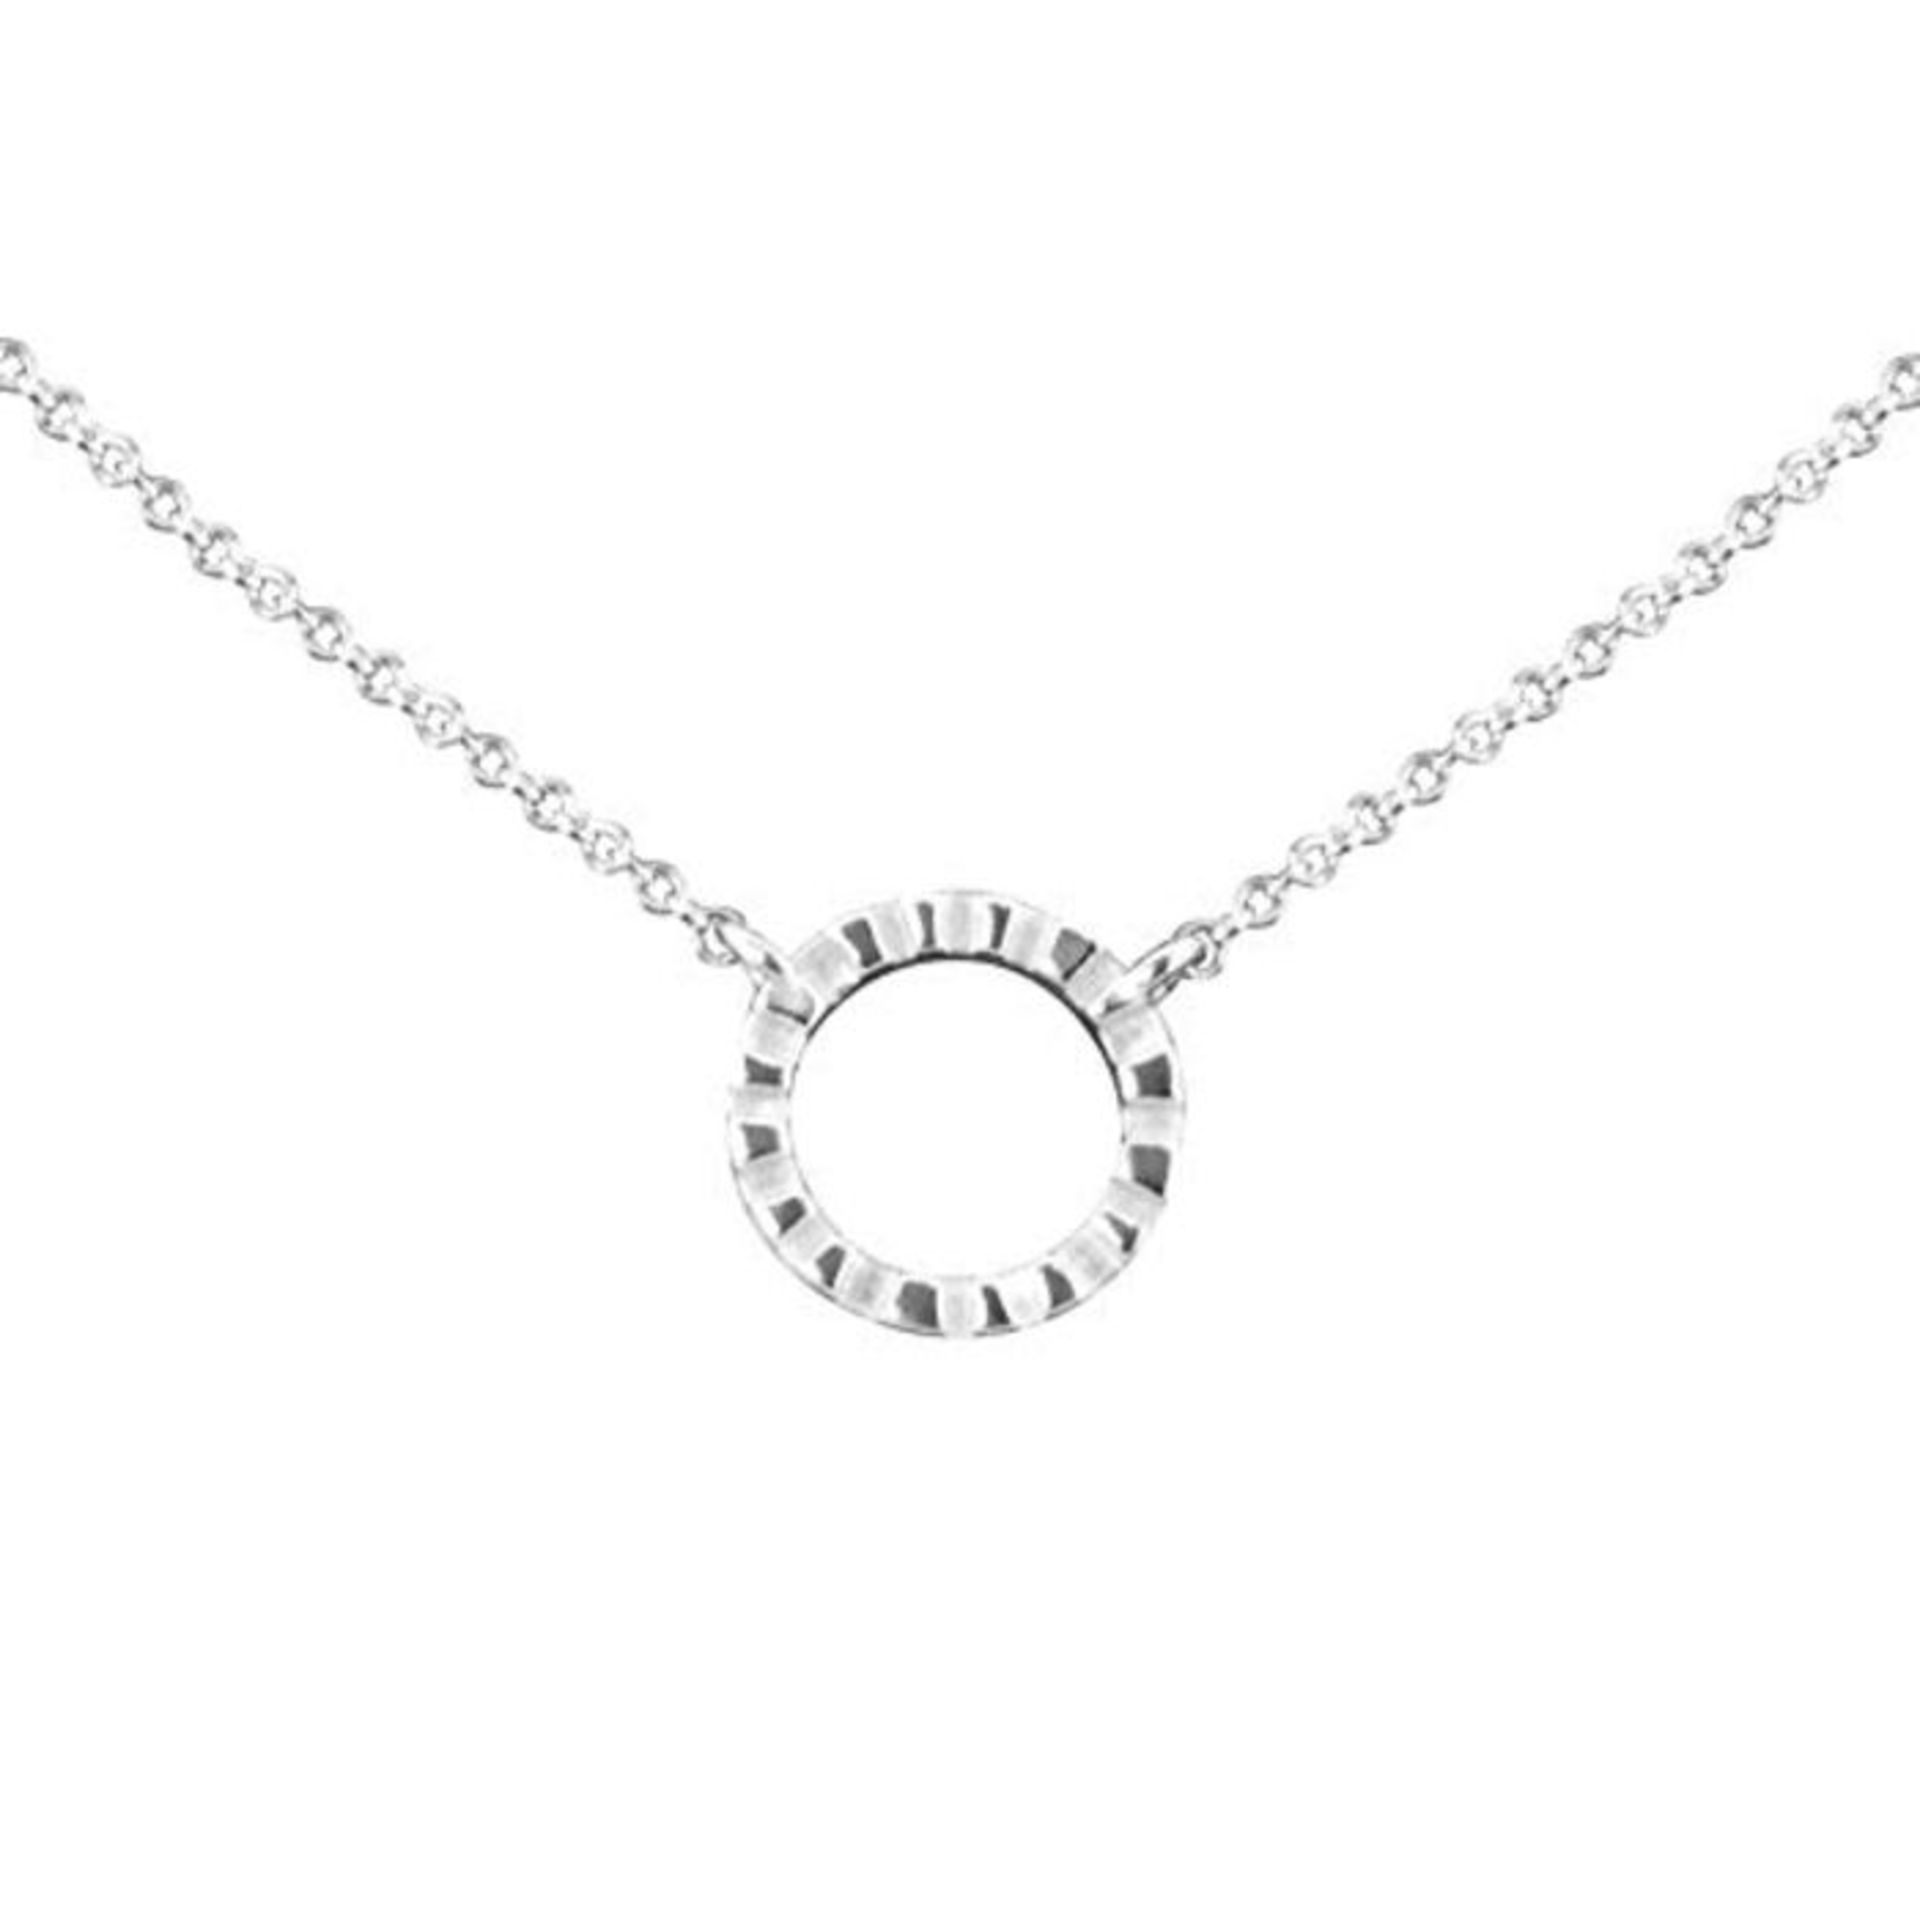 Pendant ring - white stripes with silver chain - chain and pendant made of 925 sterlin